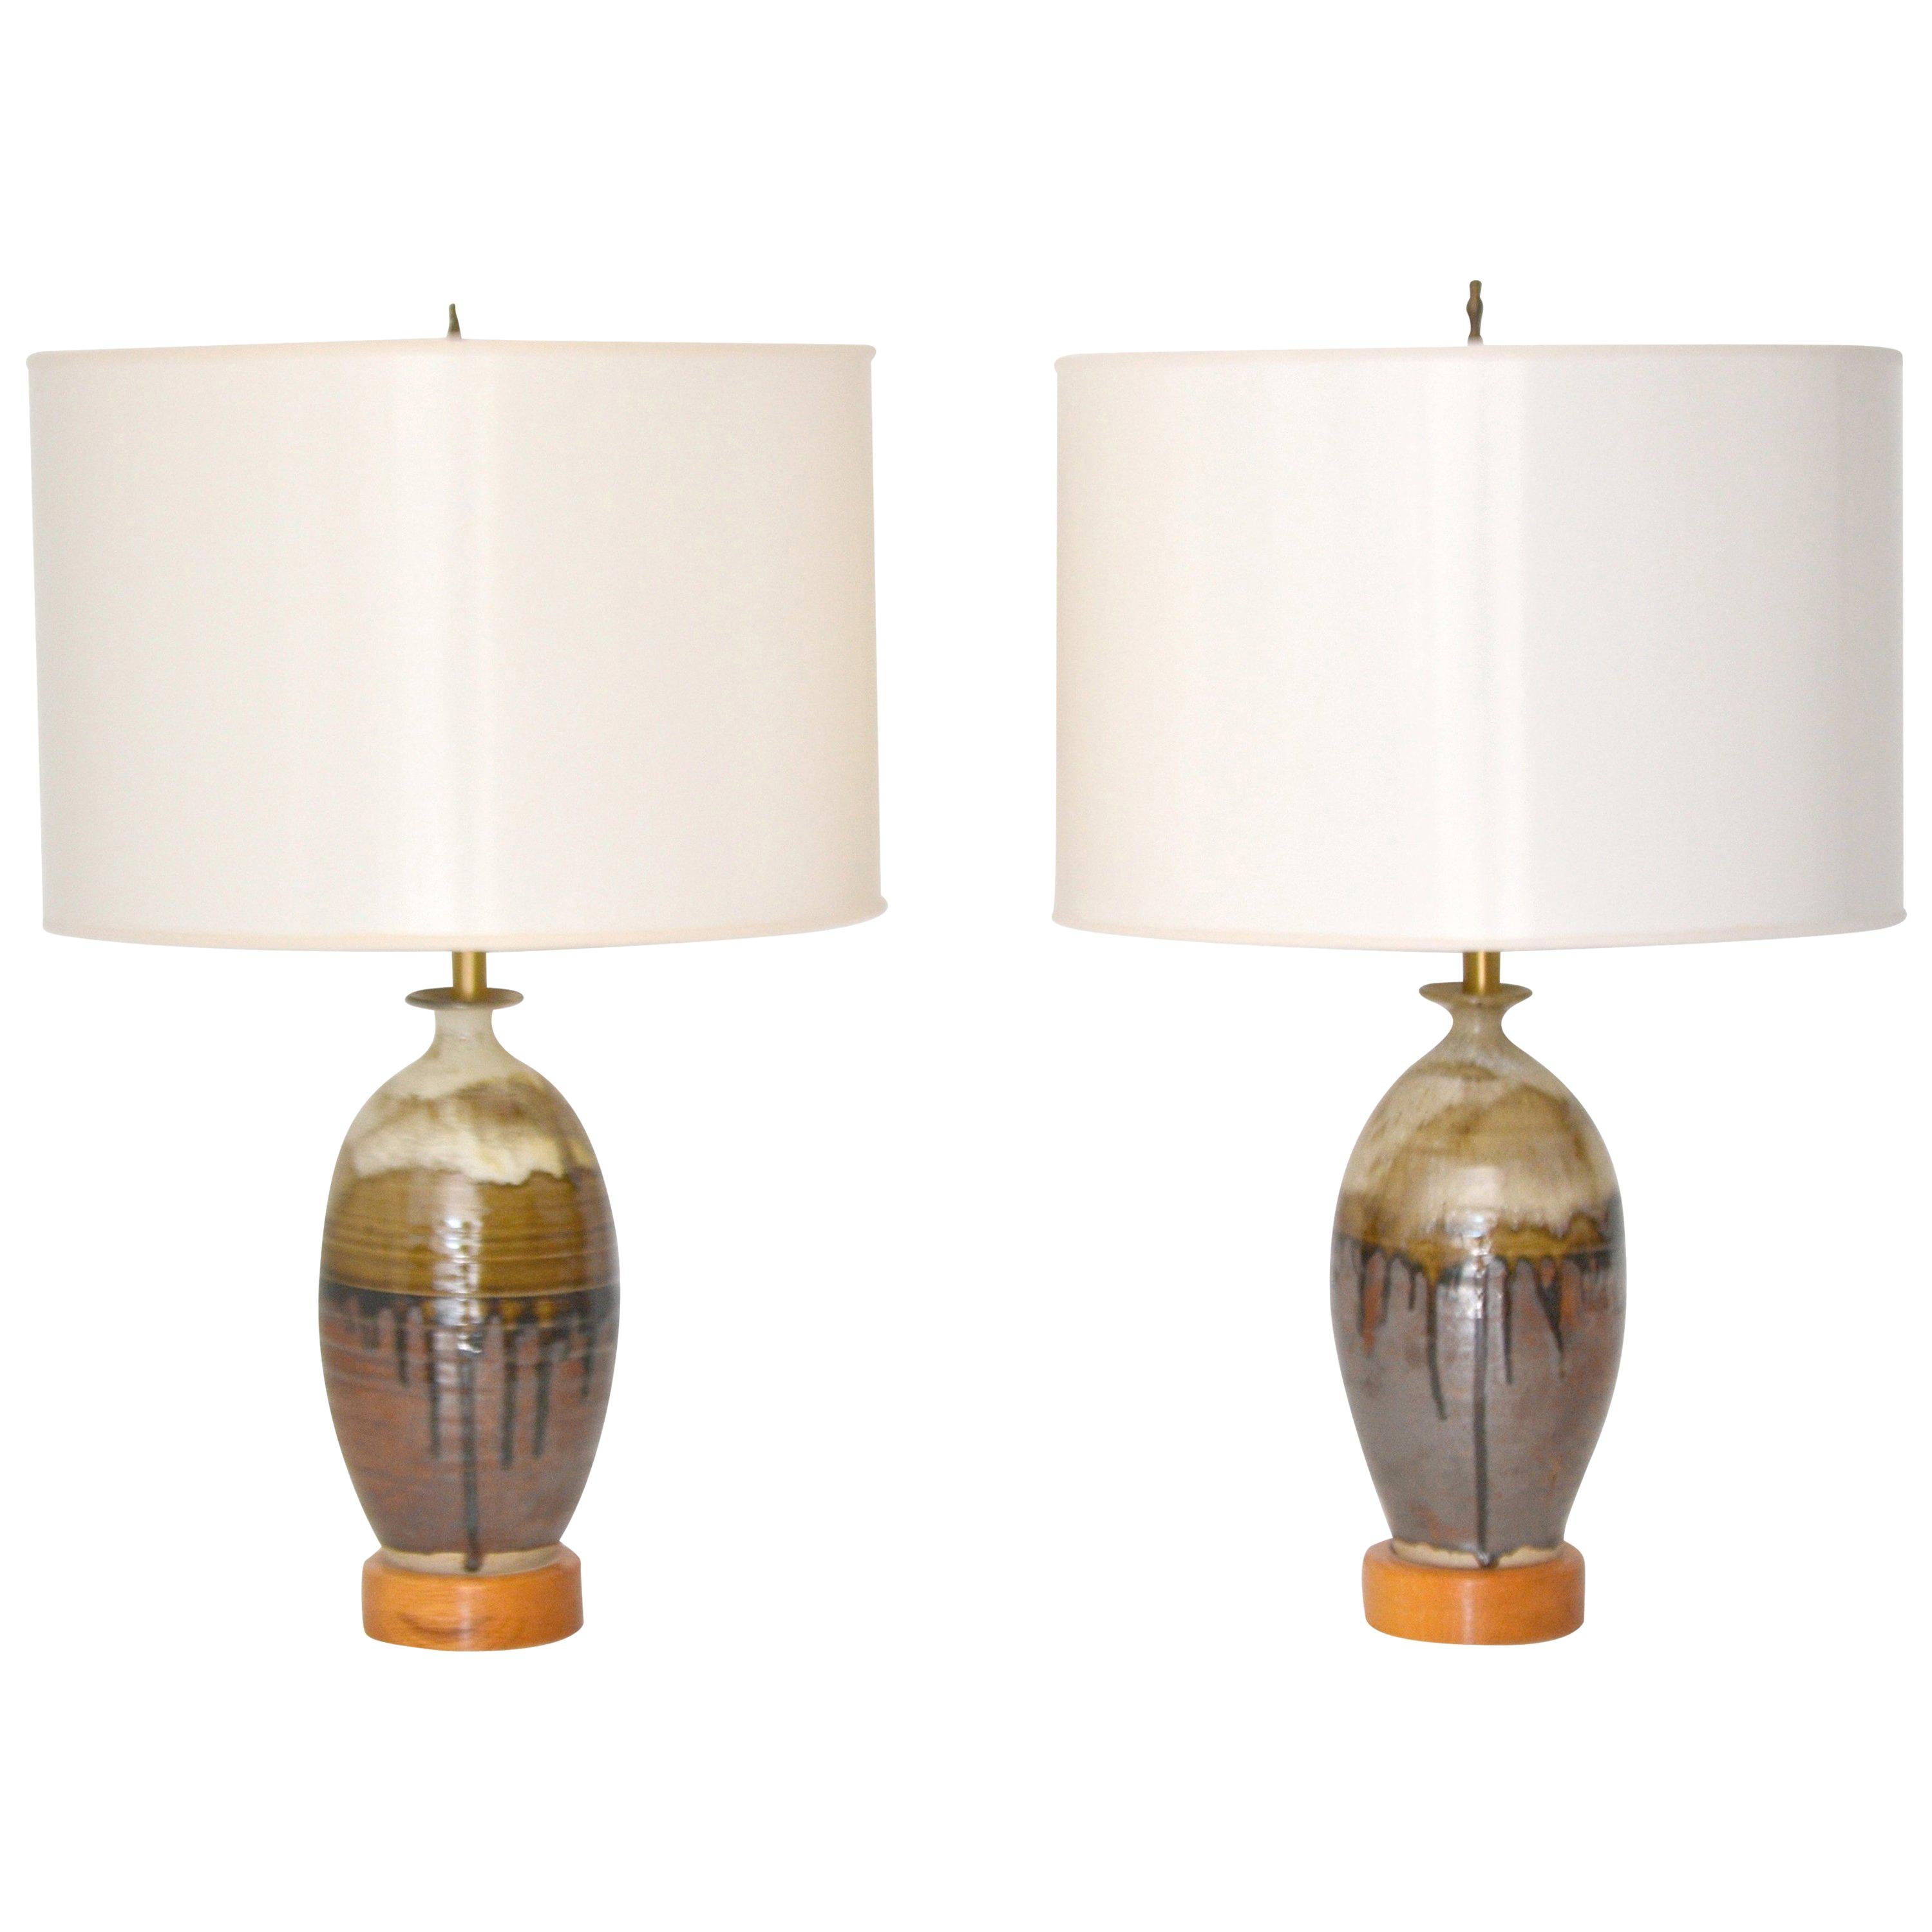 Pair of Midcentury Jar Form Ceramic Table Lamps For Sale